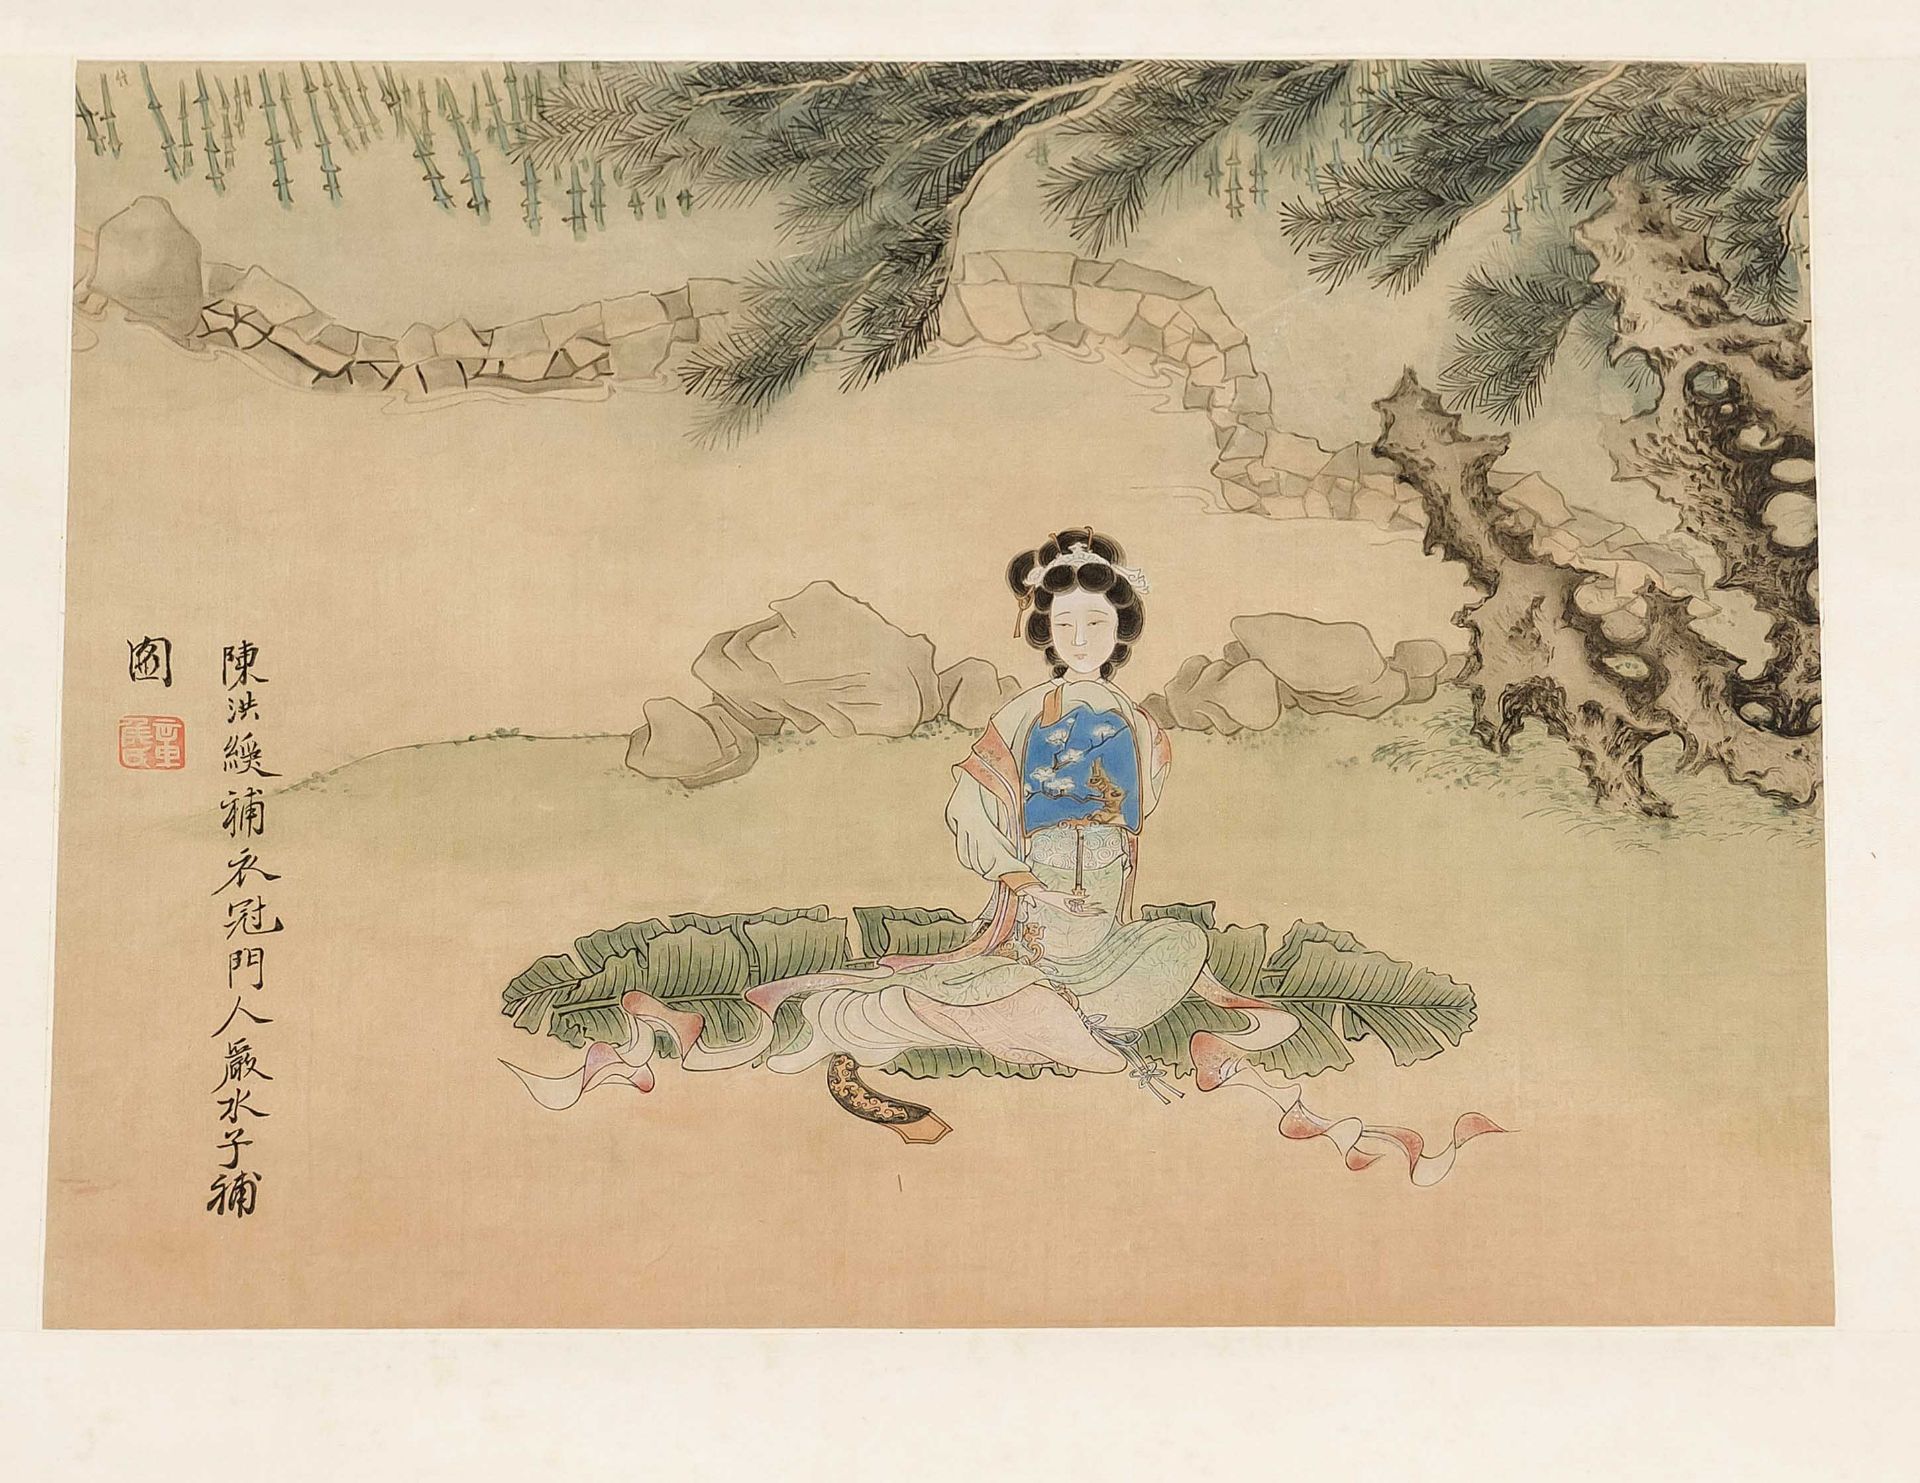 Scroll painting, China 20th century, polychrome, light colors and ink on silk. Resting beauty,